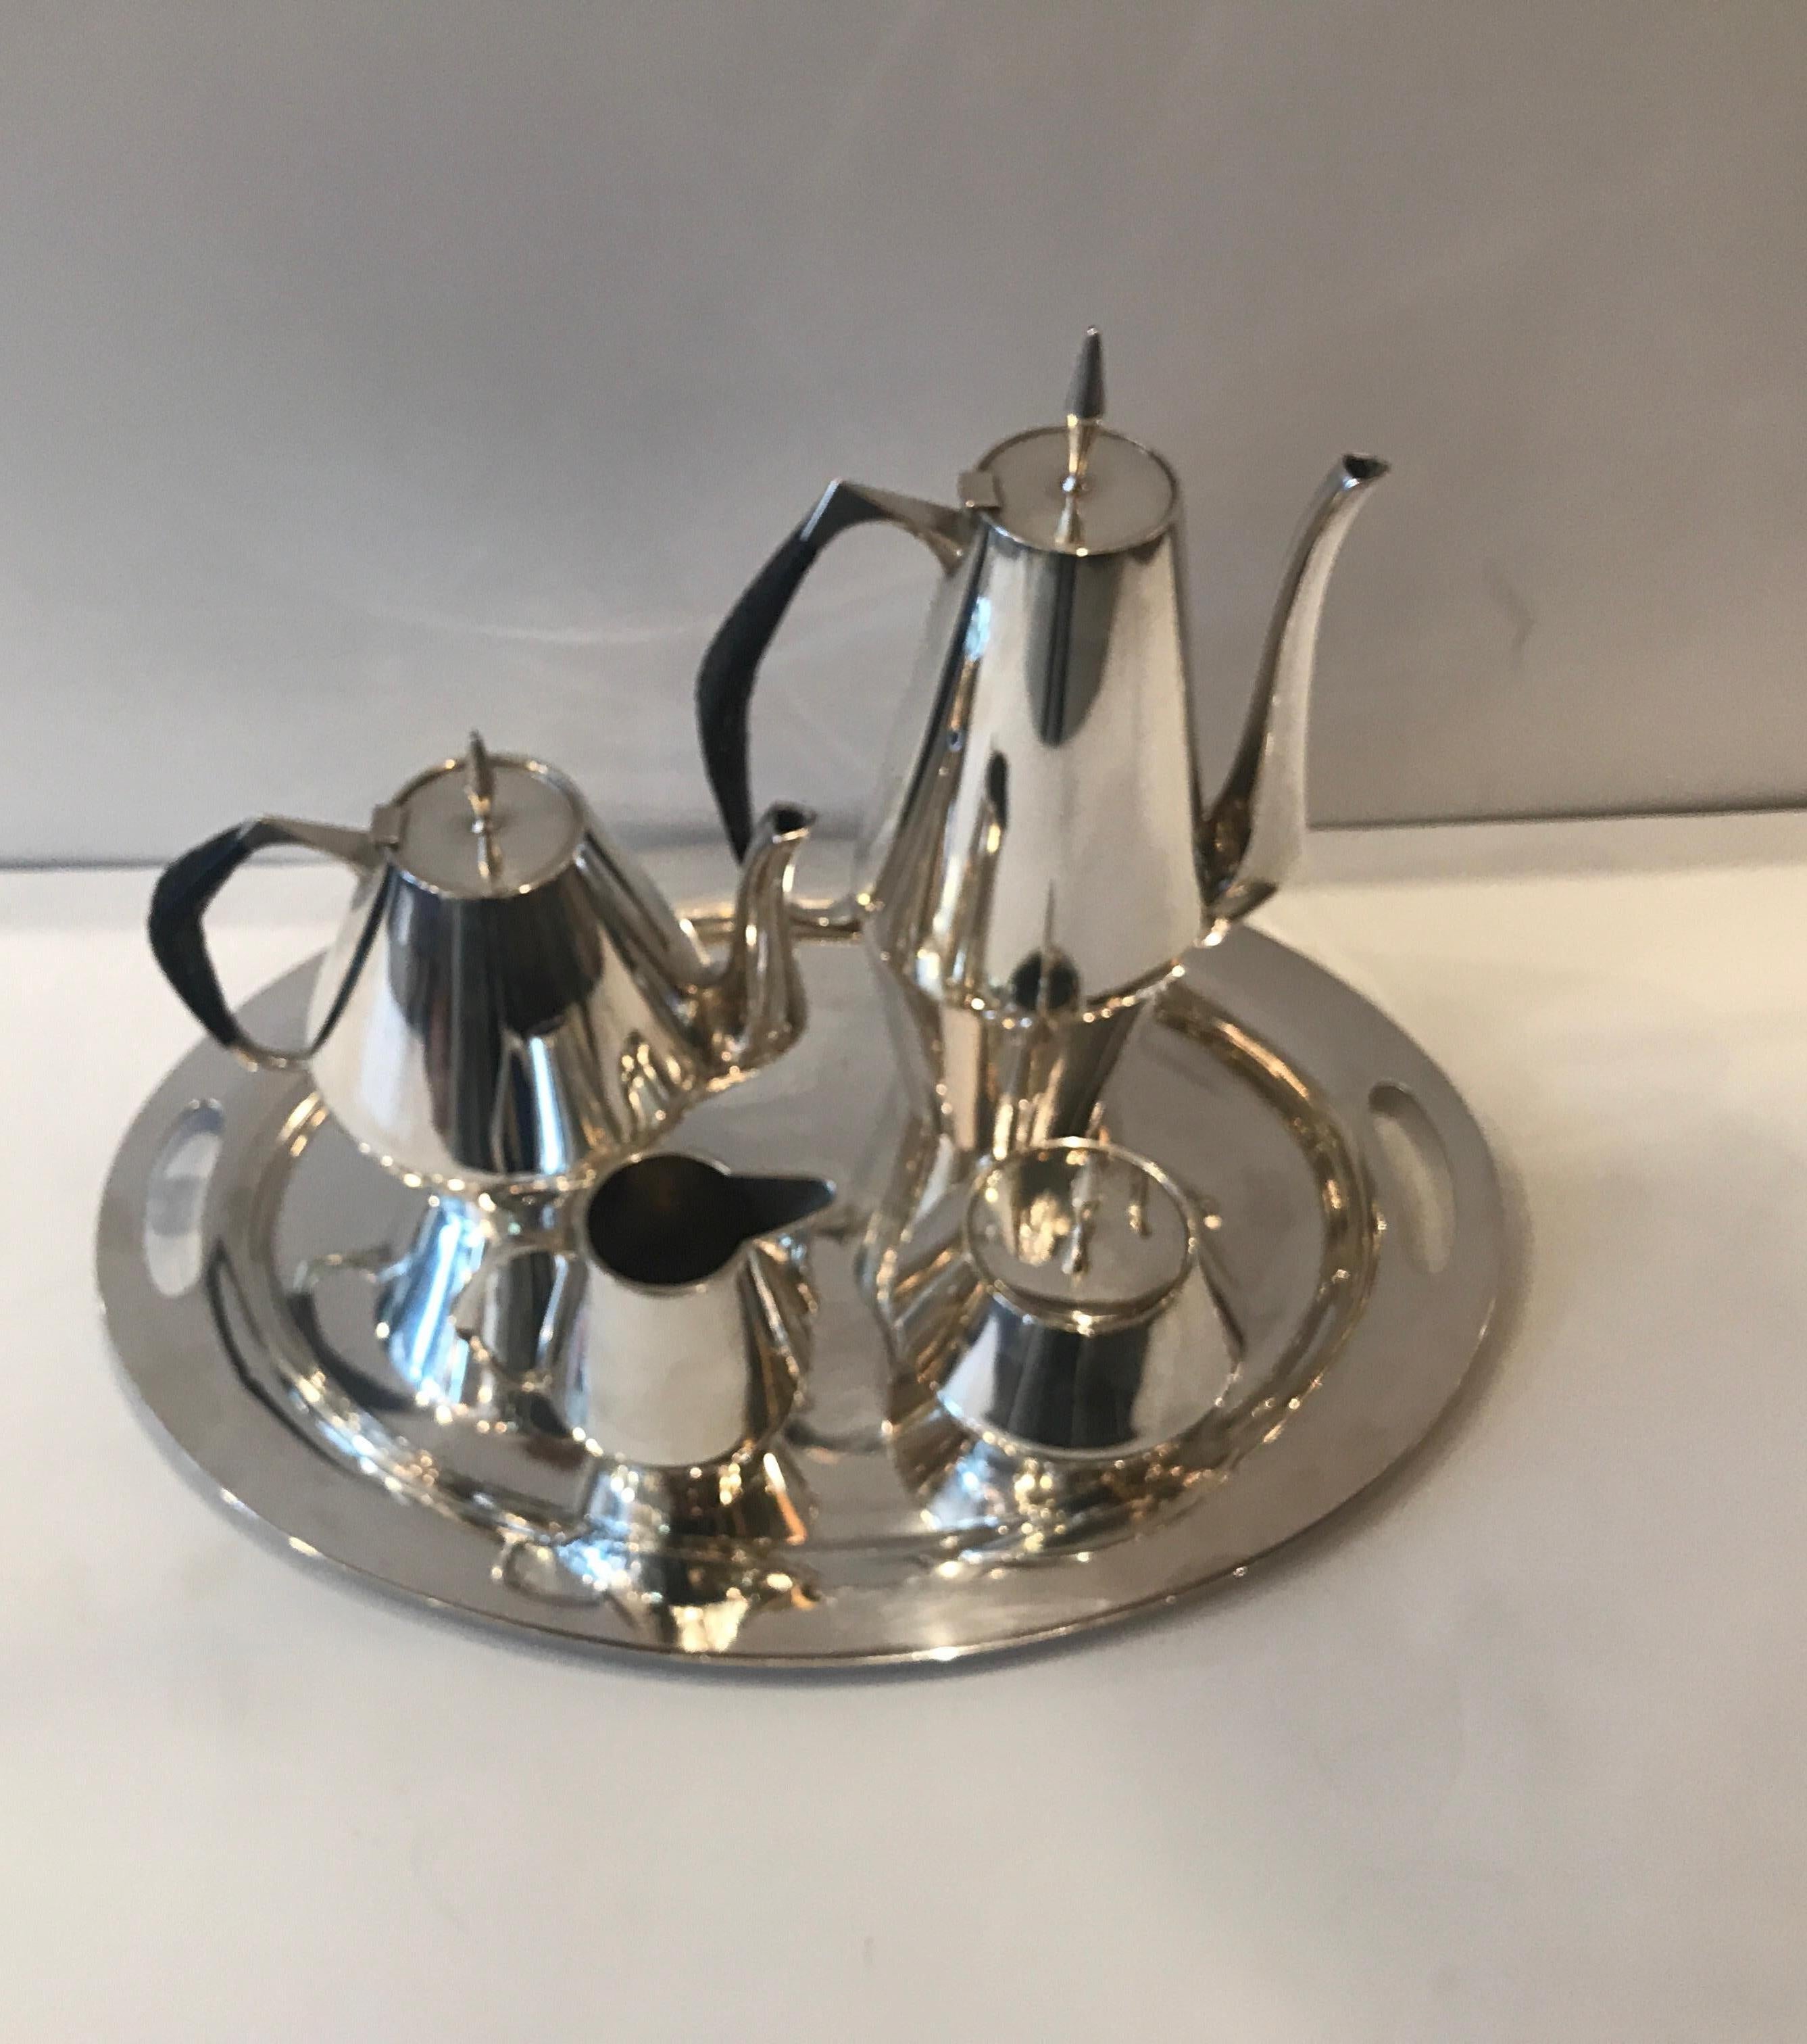 Mid-Century Modern Sterling Tea Service Designed by Gio Ponti for Reed and Barton